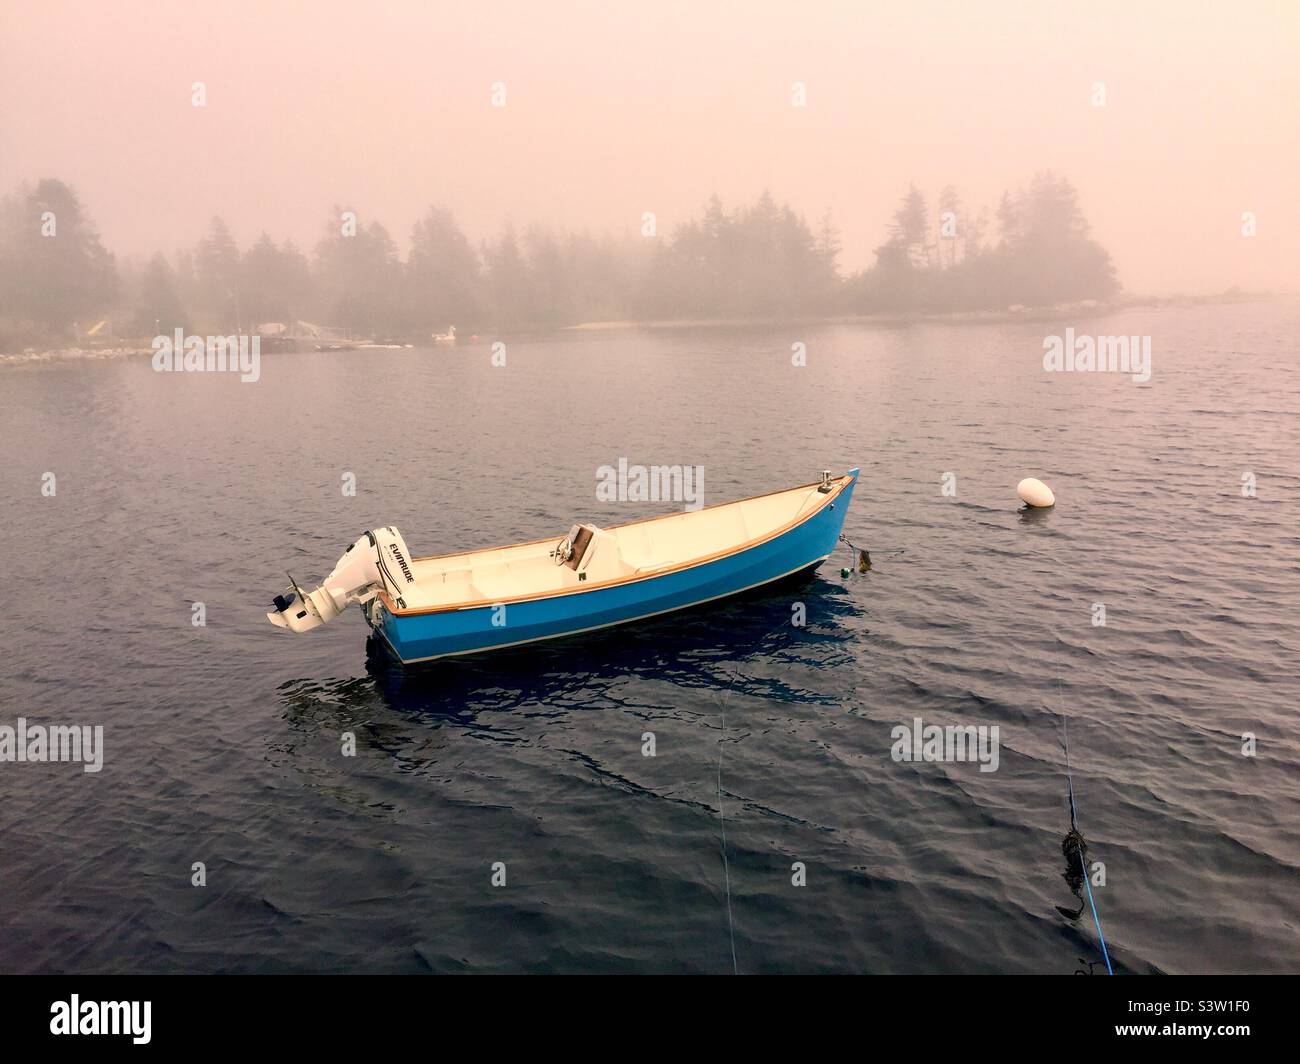 Pink fog. Storm approaching. A sheltered cove of the Atlantic Ocean, Halifax, Nova Scotia, Canada. Stock Photo